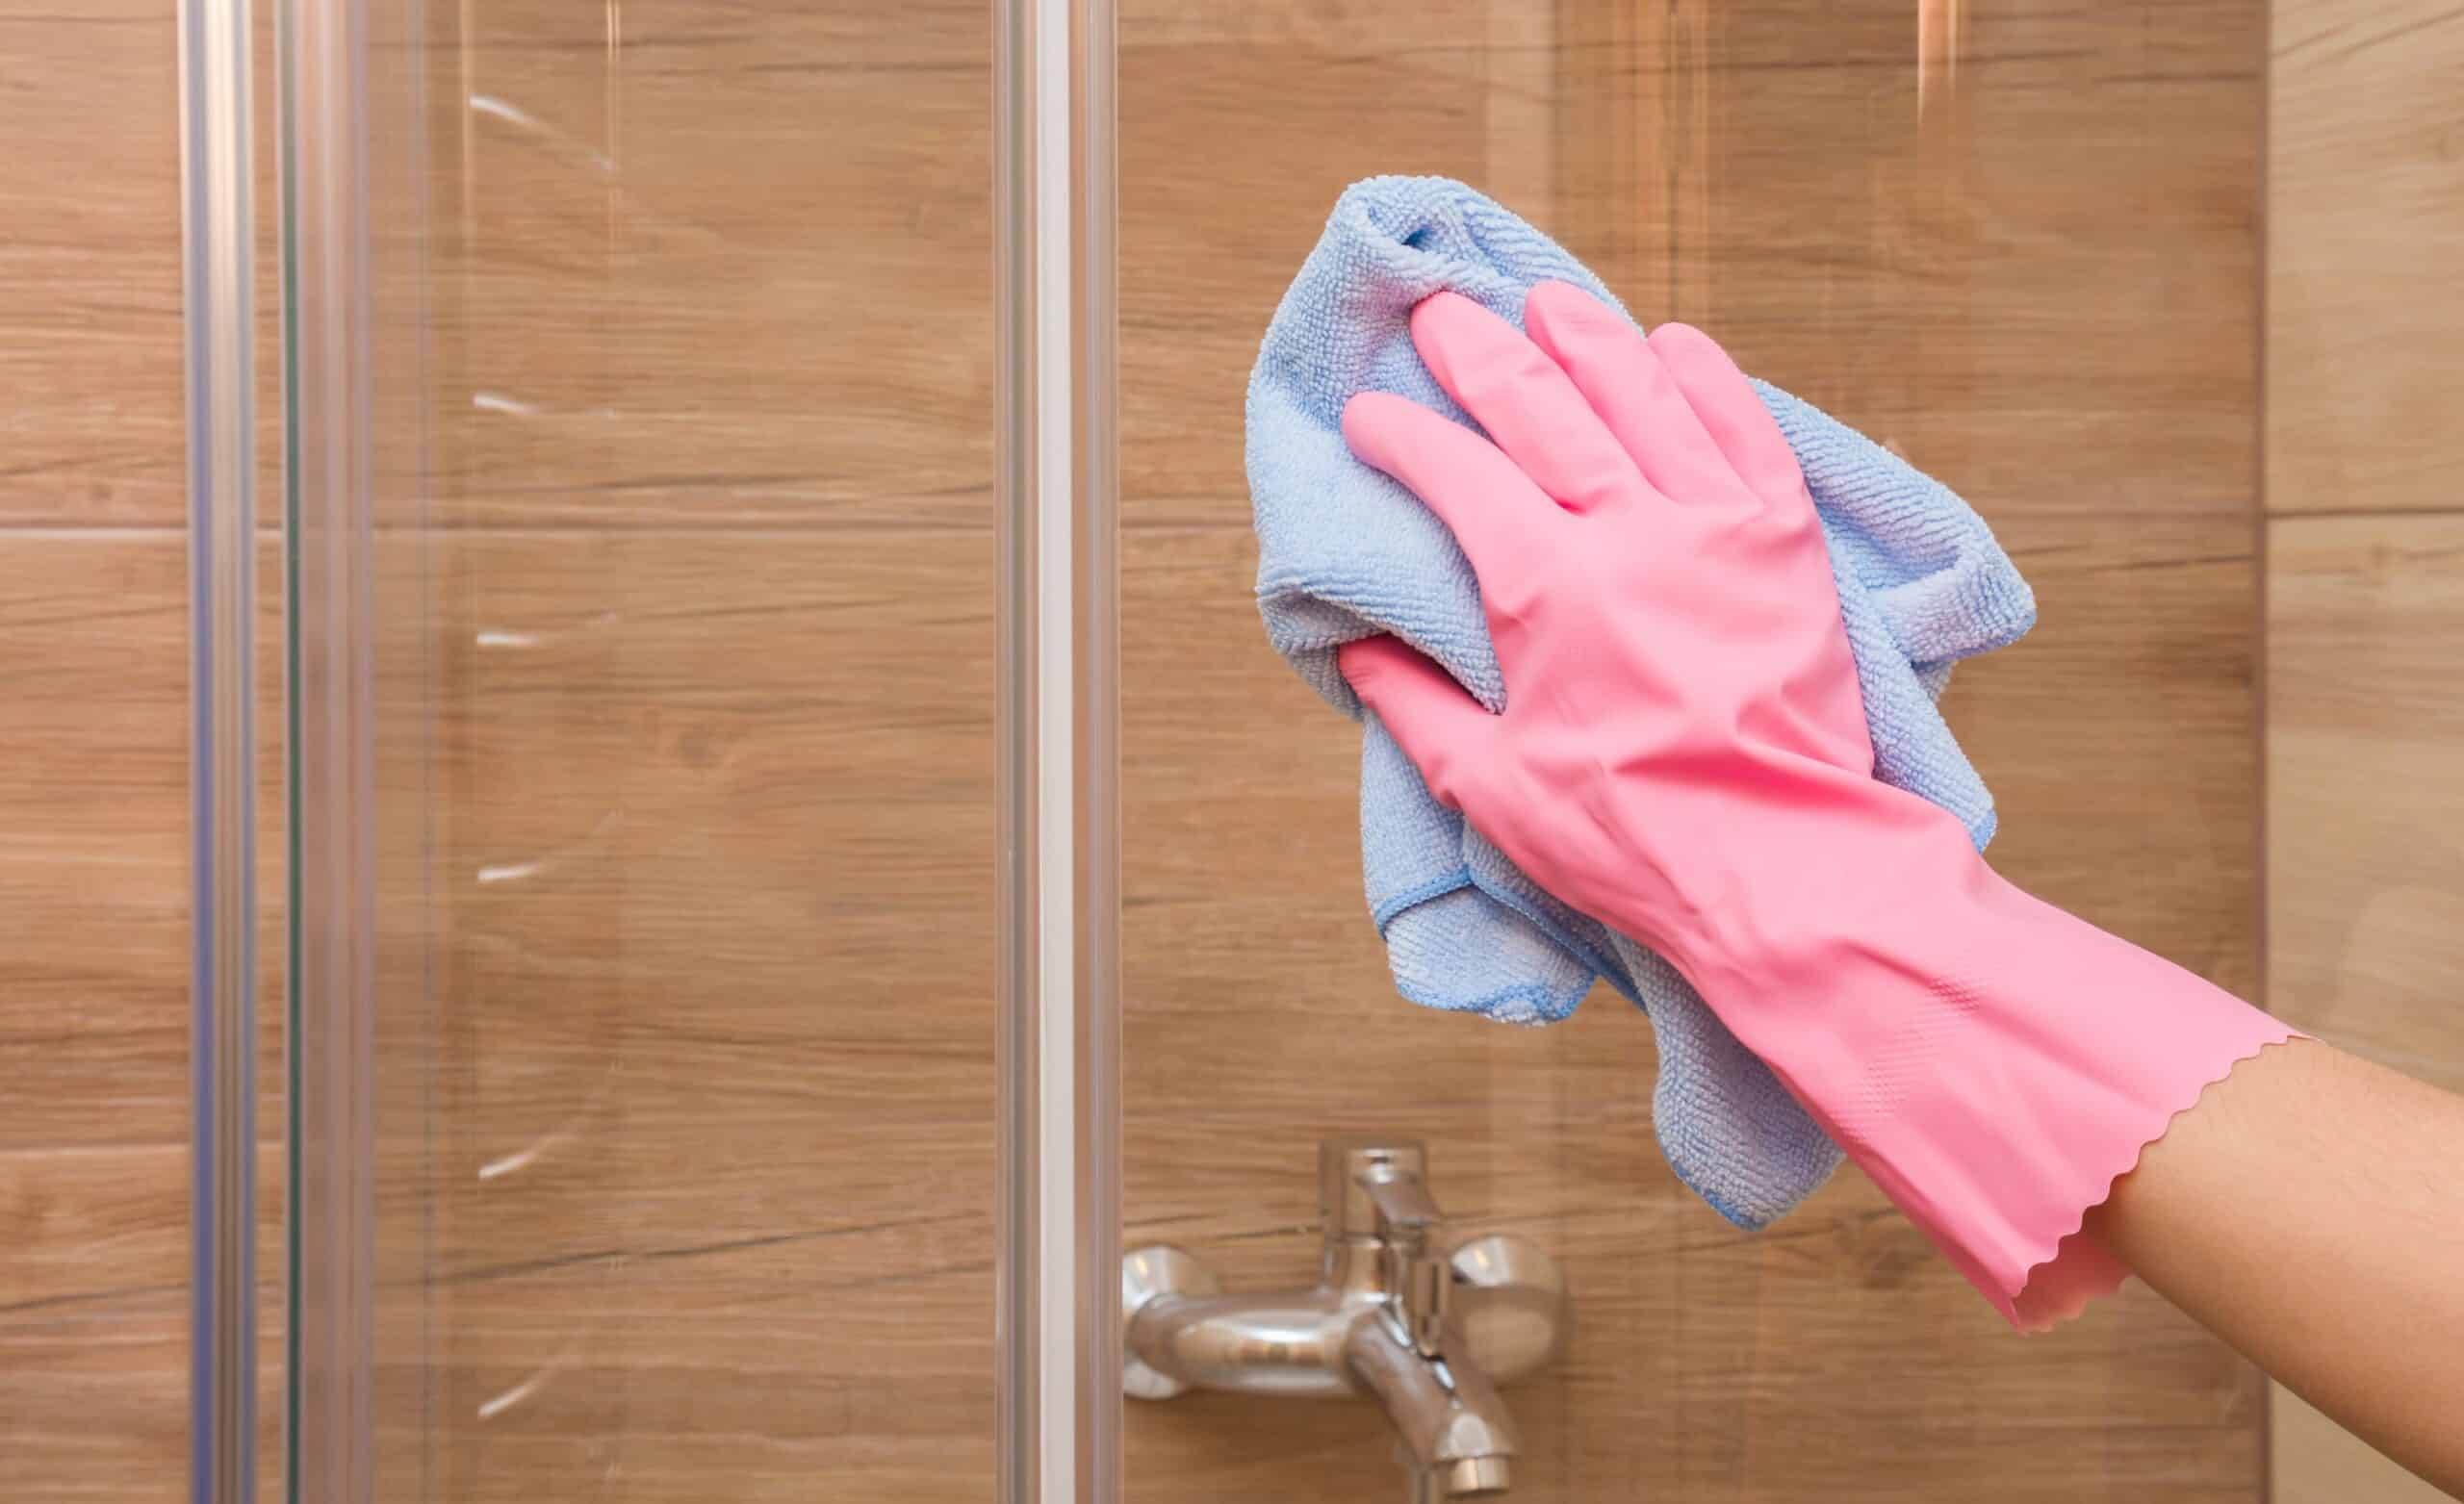 How To Remove Soap Scum From Shower Doors